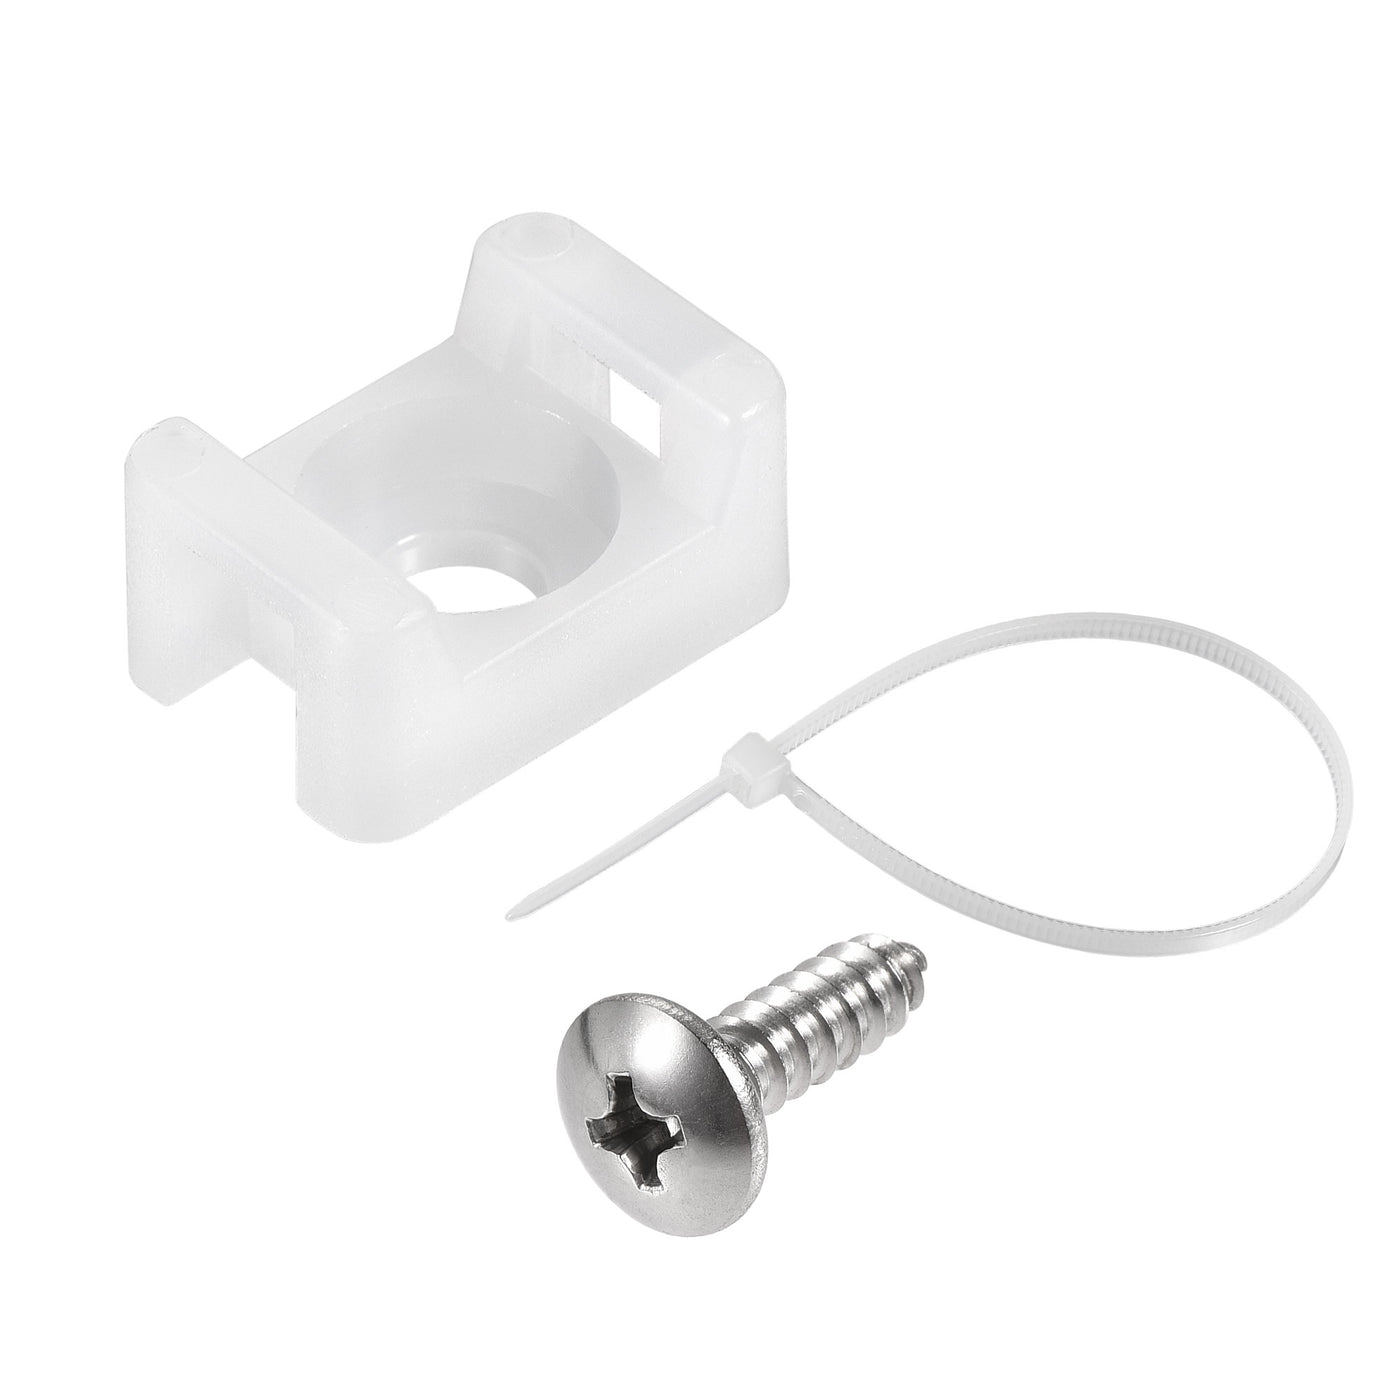 uxcell Uxcell 14.6mm x 10mm x 6.85mm Nylon Cable Fasten Clip with Screws and Ties White 50 Set